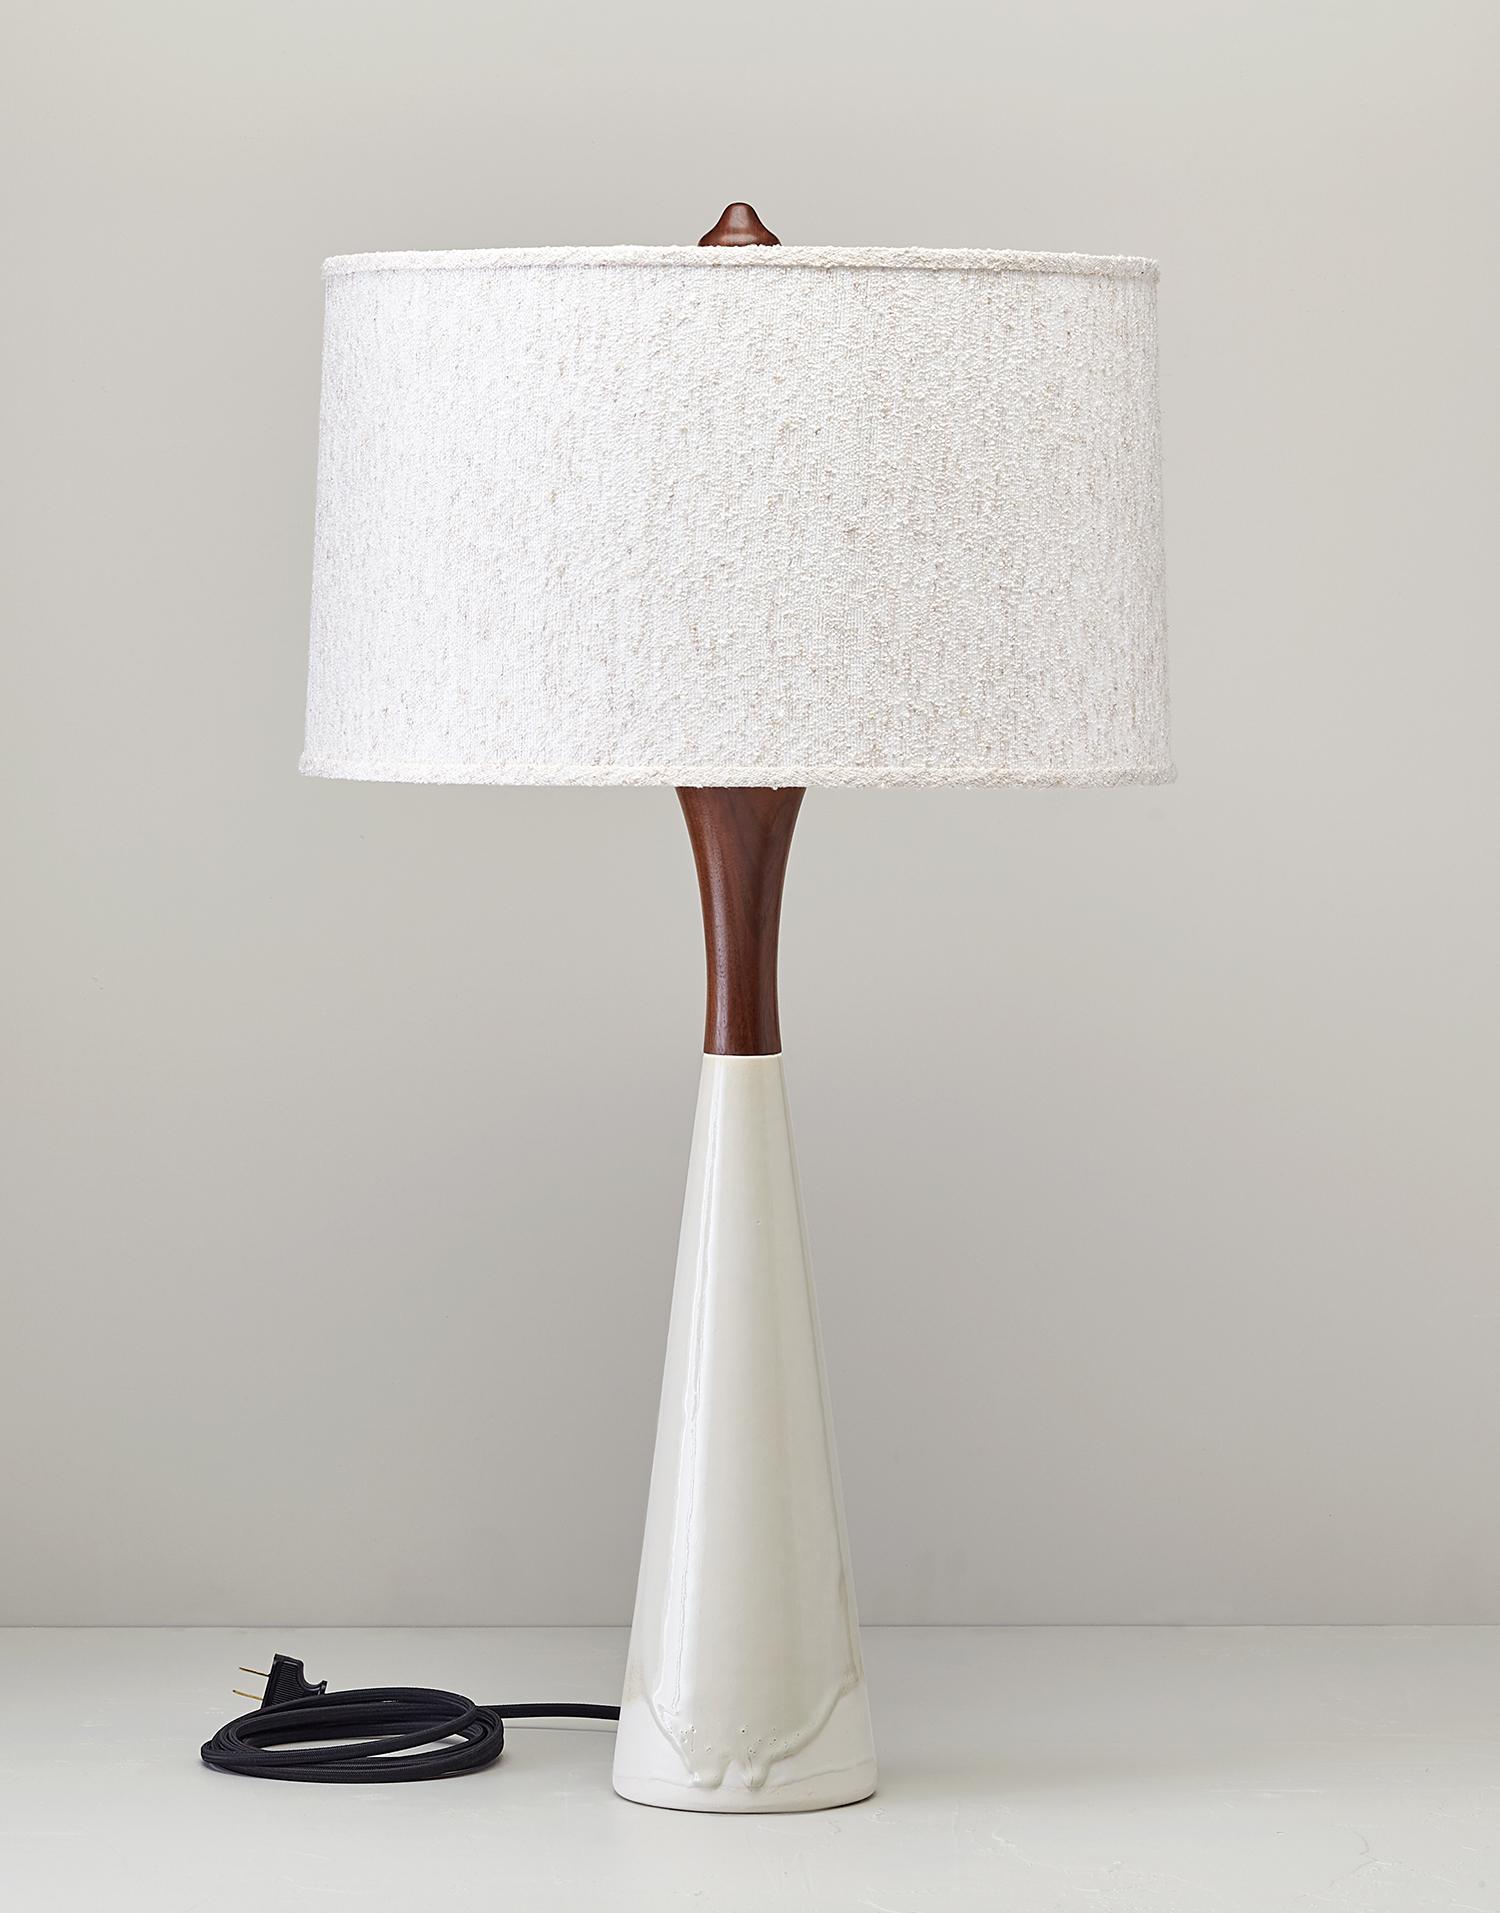 Statuesque Hanni is tall and slender. With a nod to mid-century styling the the handcrafted base is cast in porcelain topped with a turned walnut neck and finial. The shade is made of nubbly boucle. Available in four glazes. Nickel hardware.